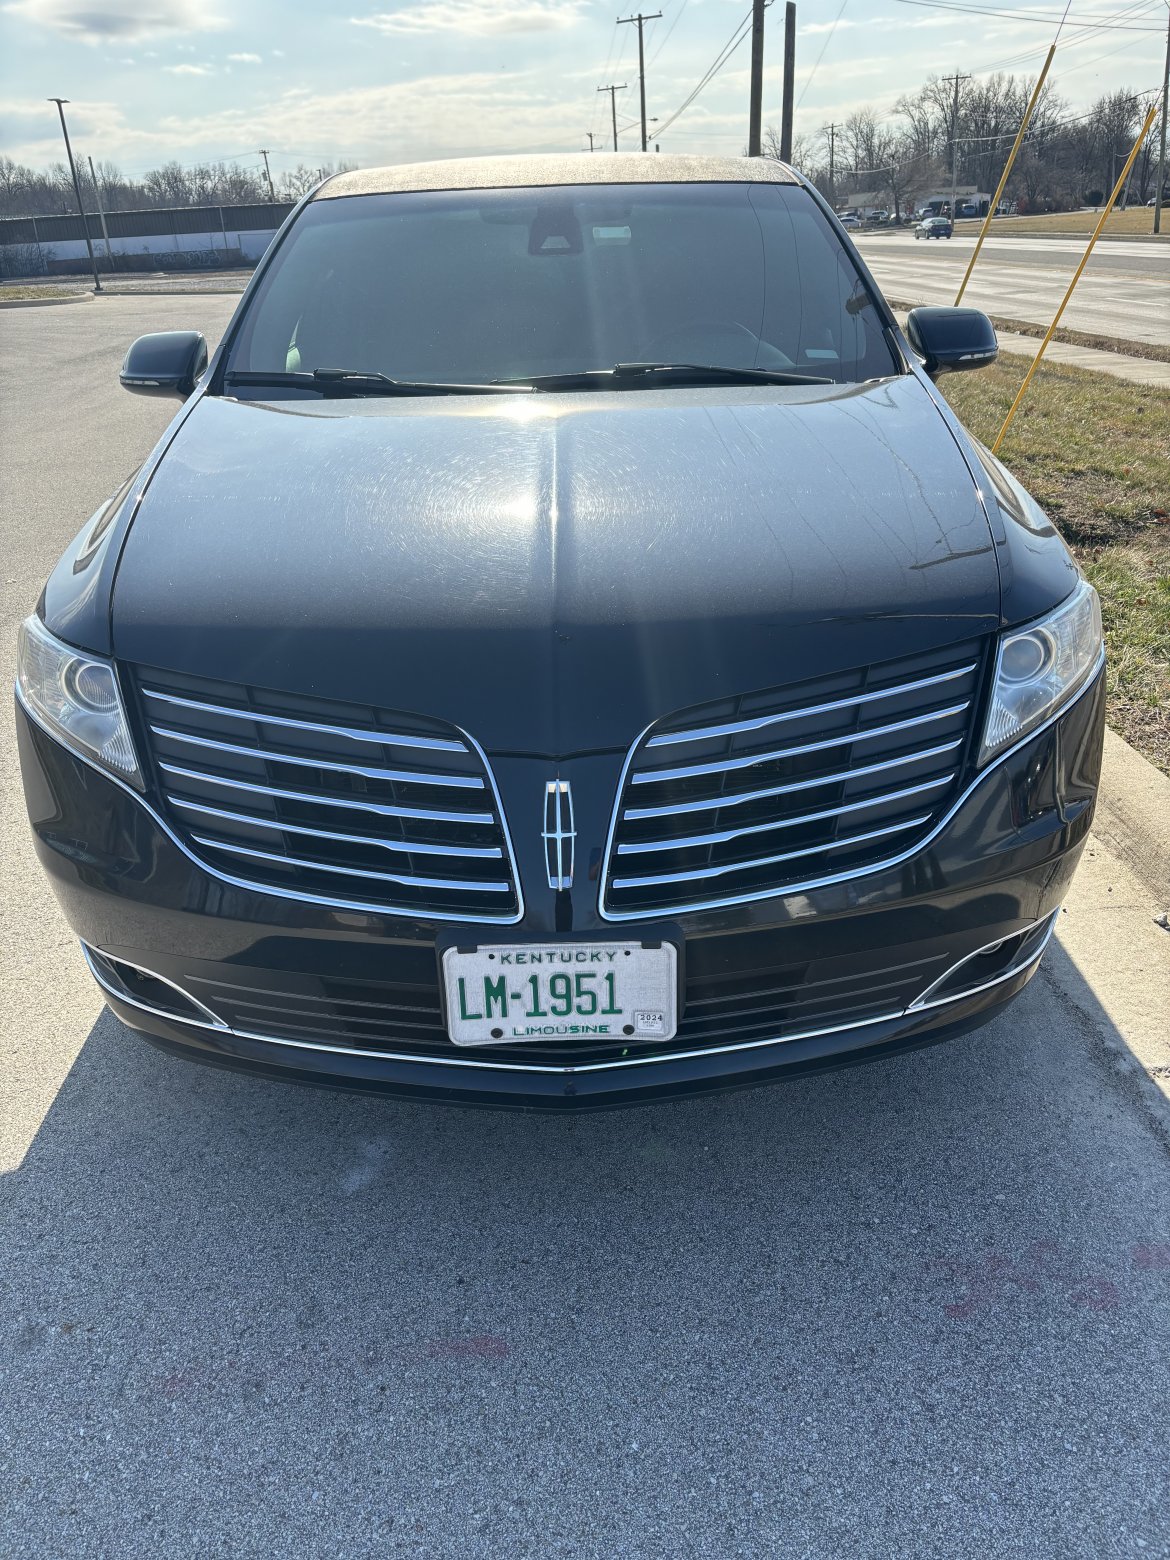 Limousine for sale: 2018 Lincoln MKT by Royal